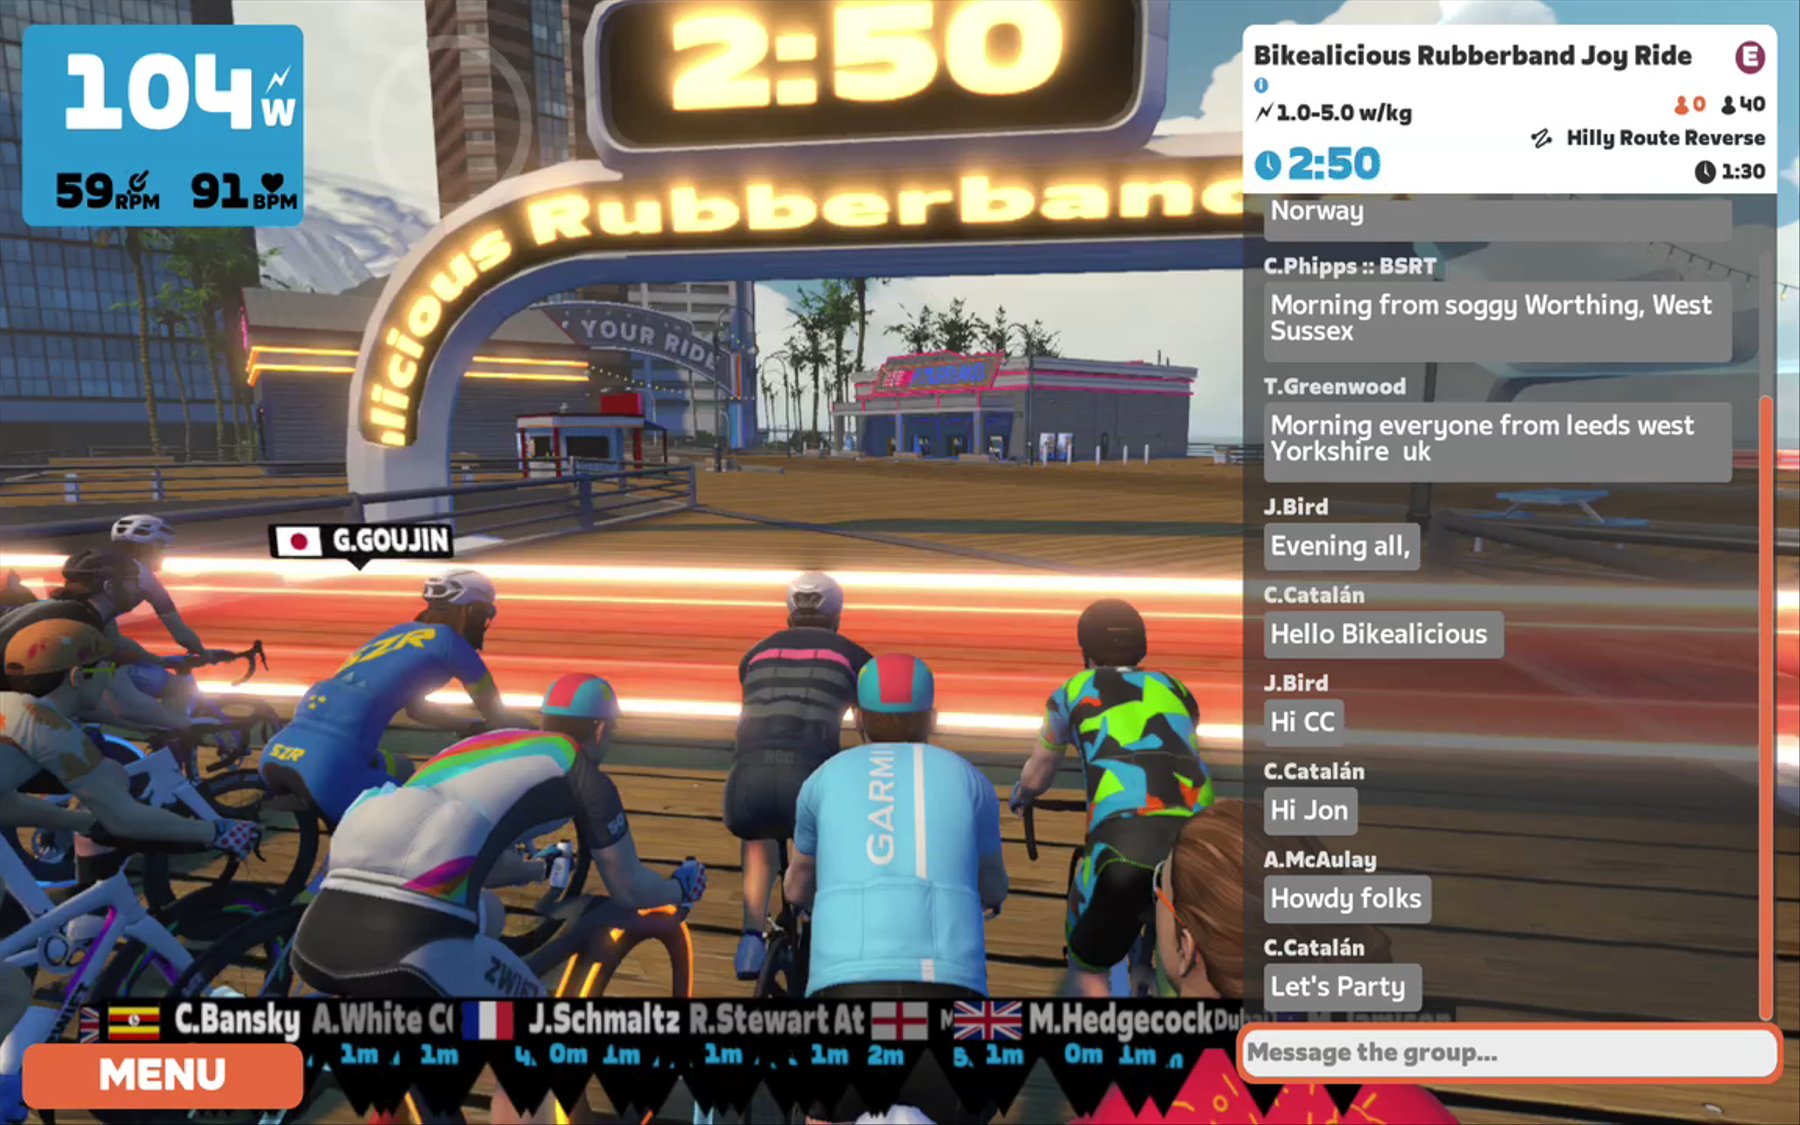 Zwift - Group Ride: Bikealicious Rubberband Joy Ride (E) on Hilly Route Reverse in Watopia